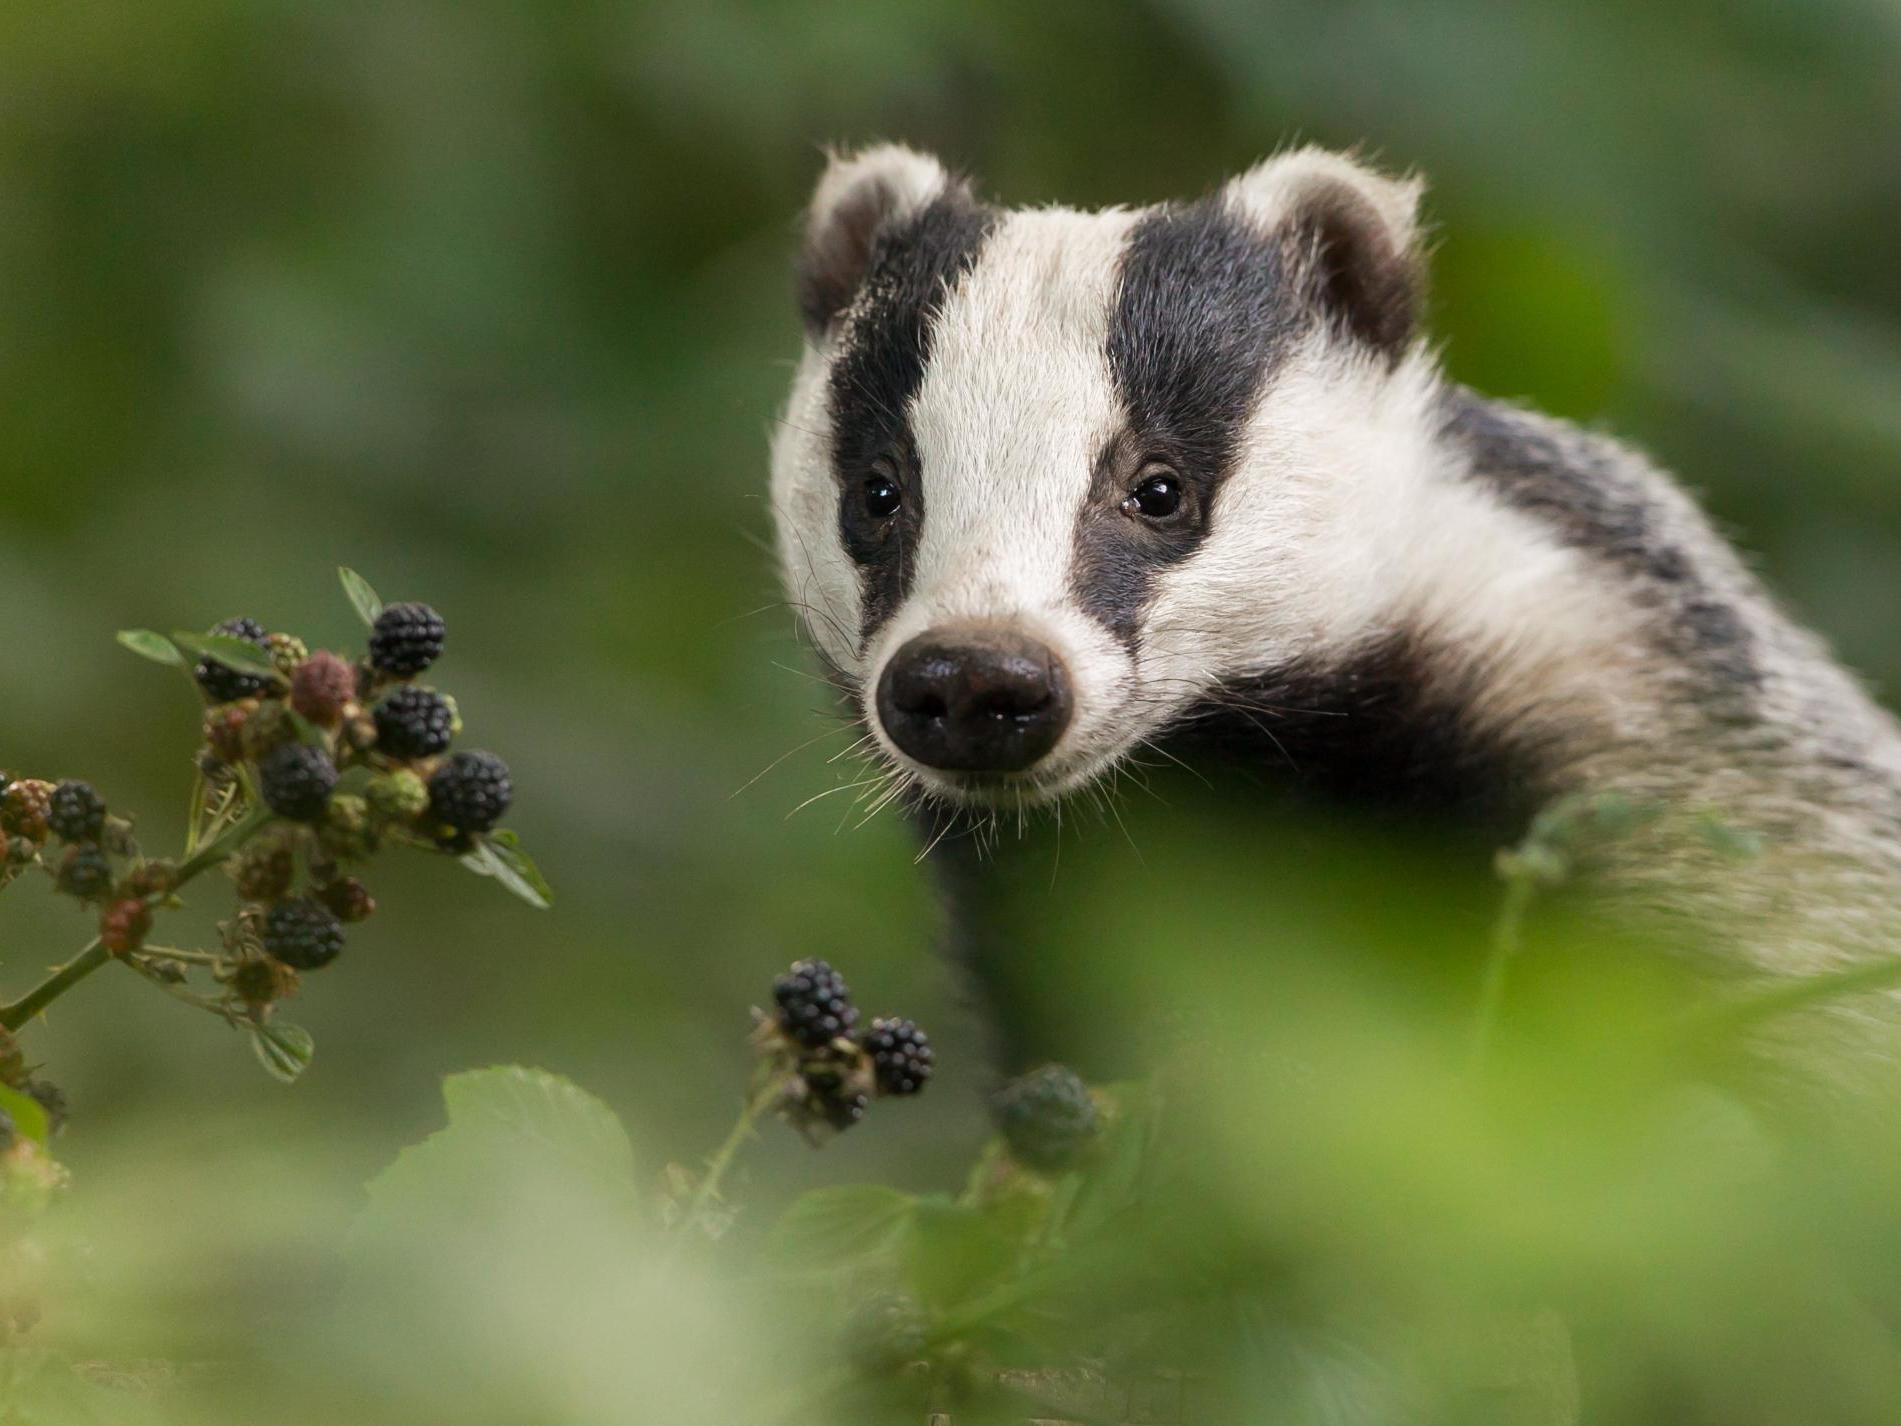 Badgers are among the countryside mammals infected by bovine tuberculosis, which is still rising